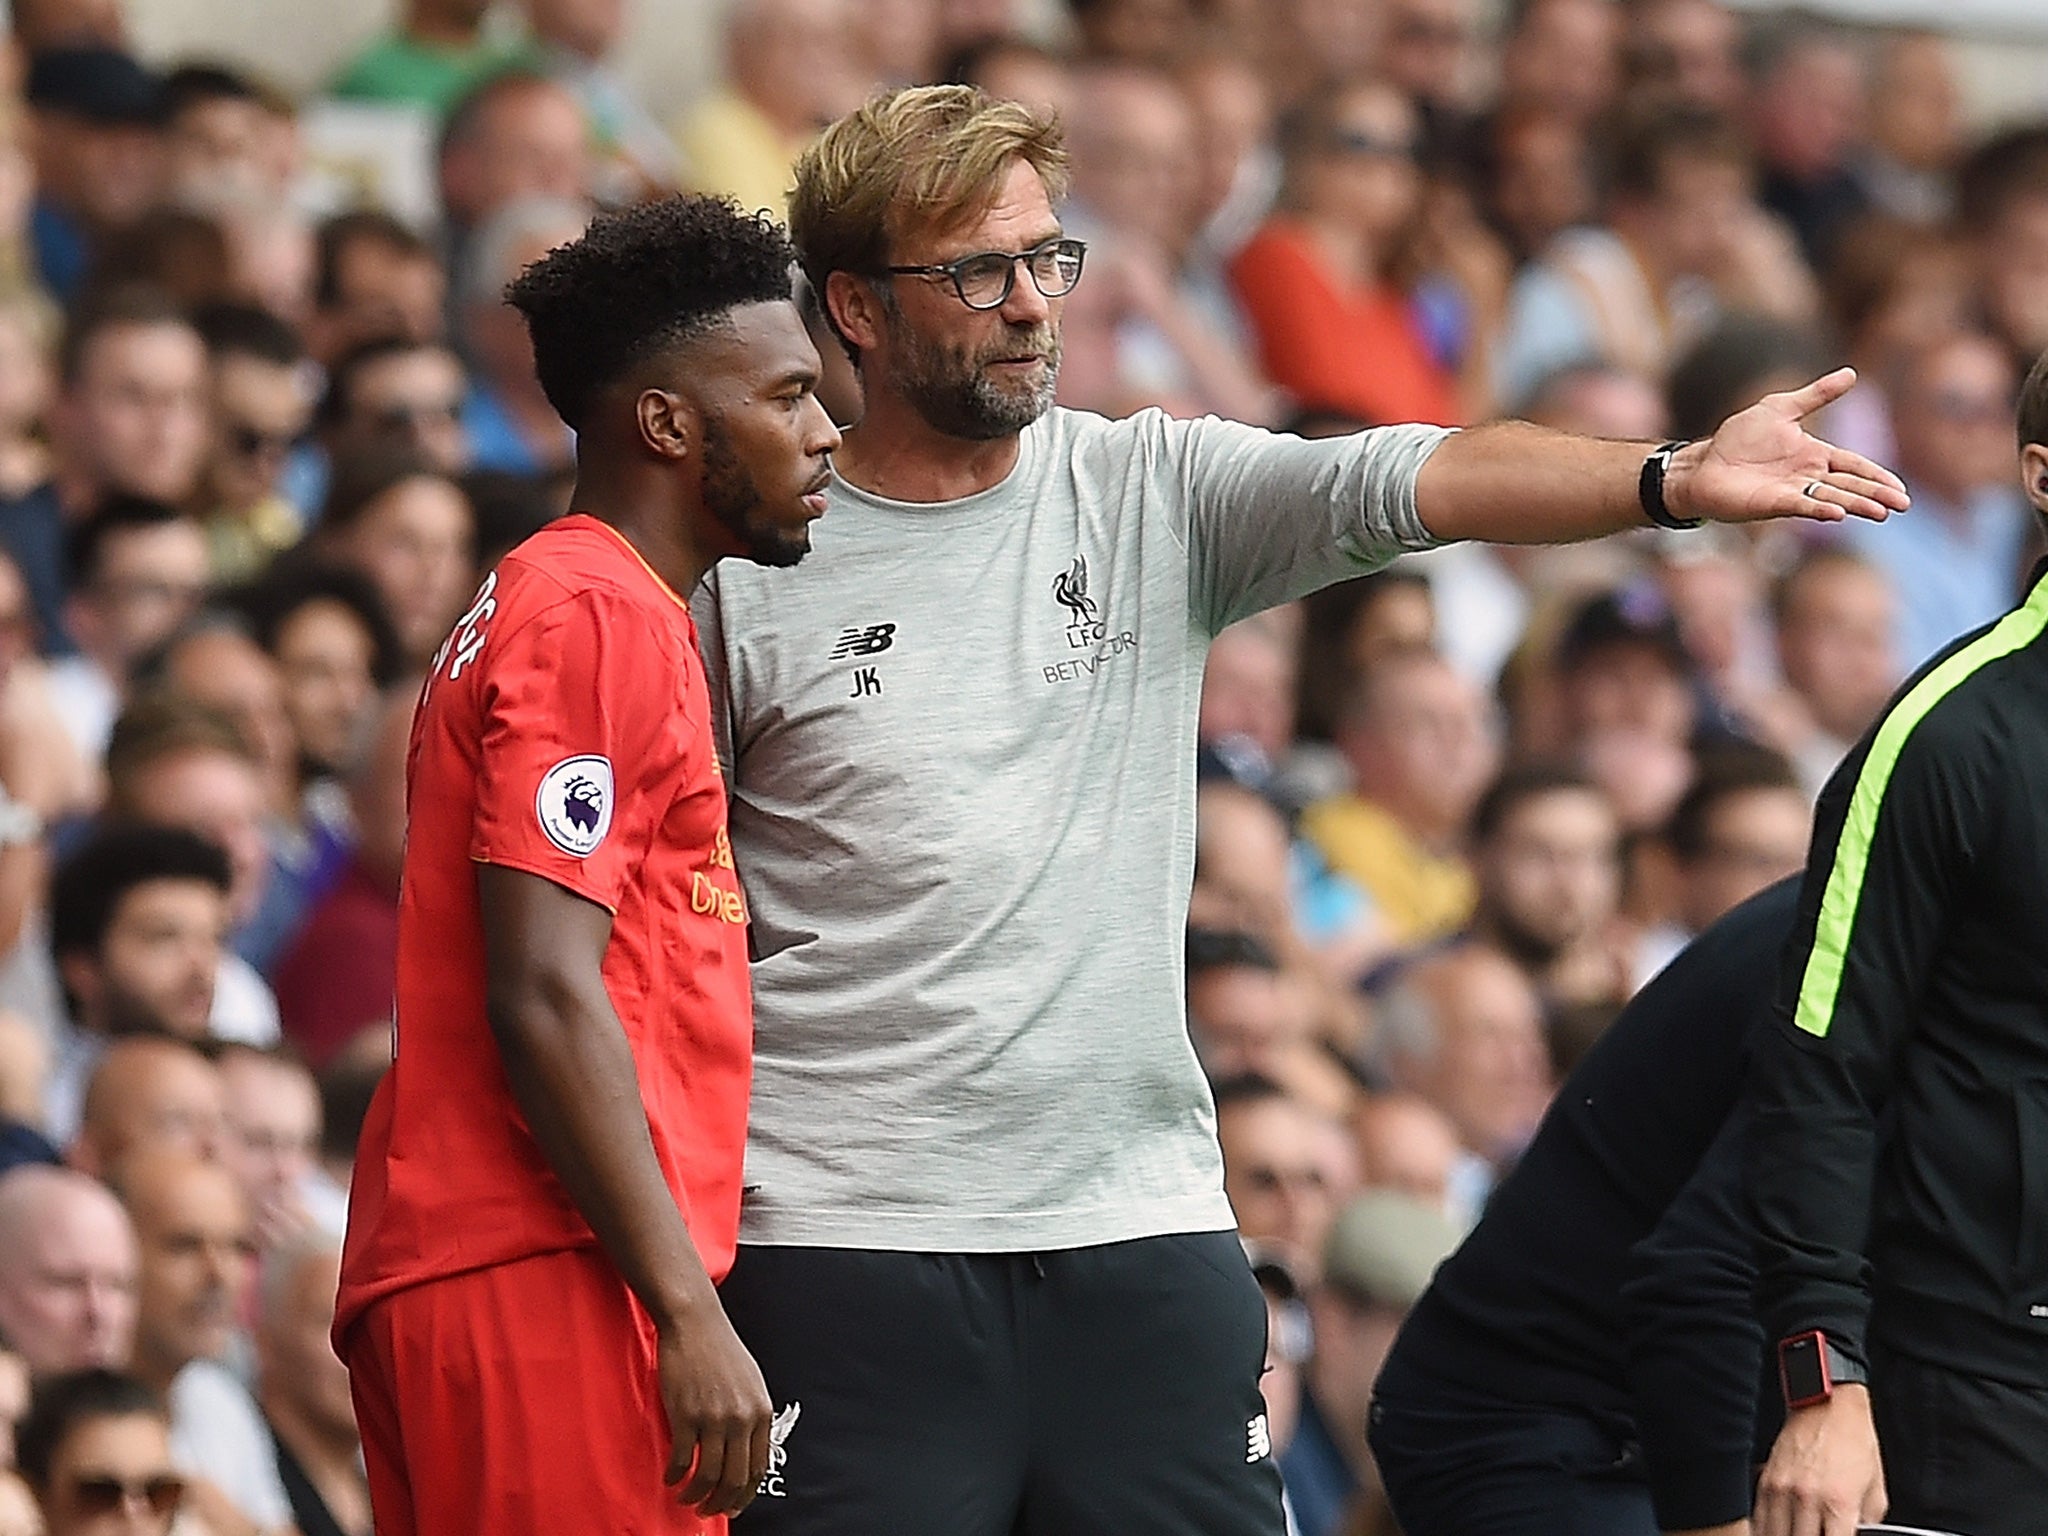 Daniel Sturridge has been plagued by injury problems